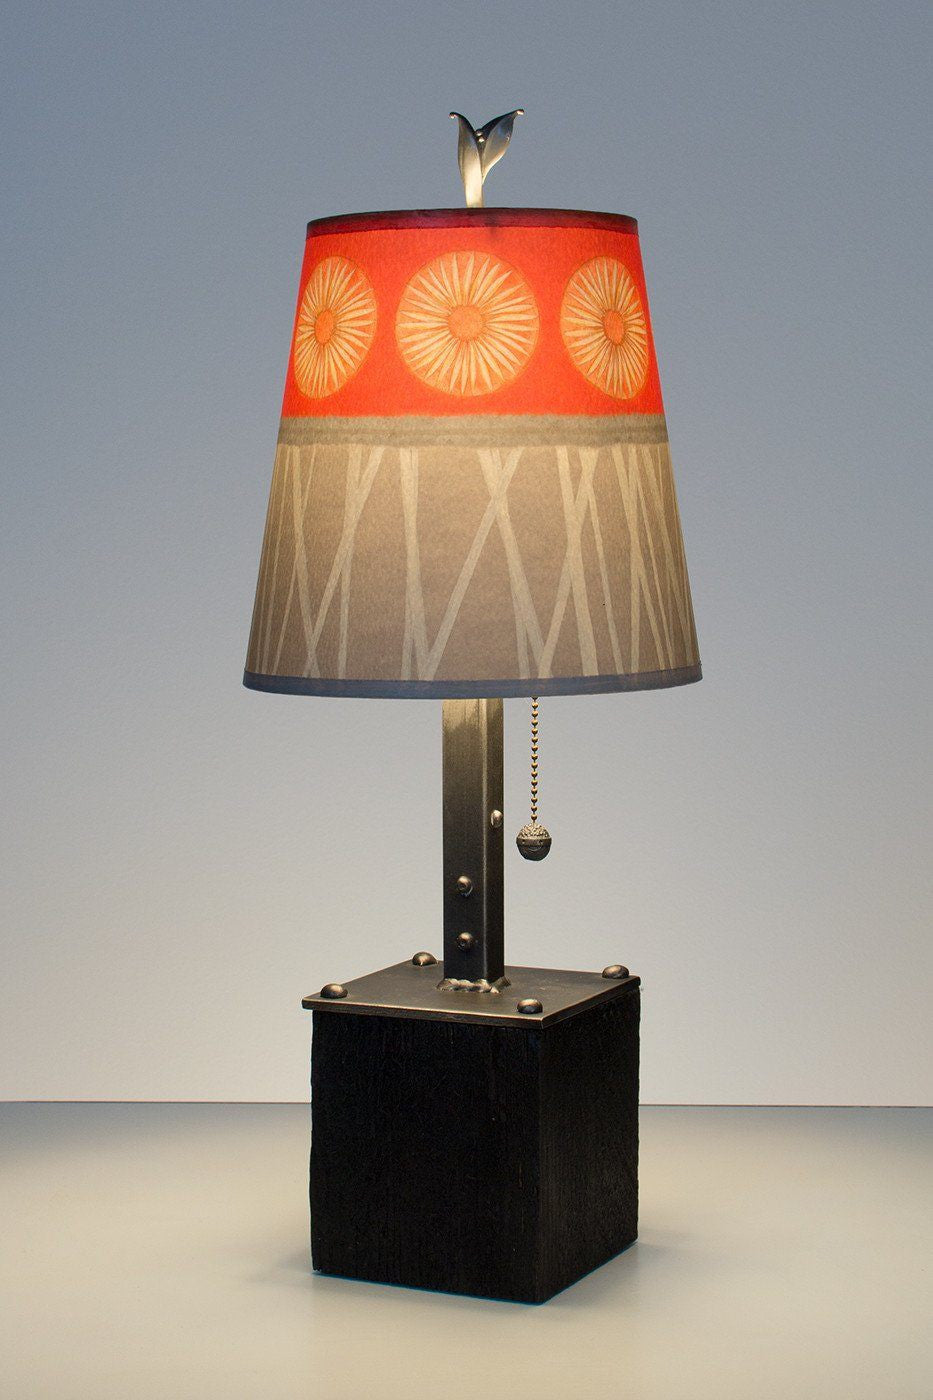 Janna Ugone & Co Table Lamps Steel Table Lamp on Reclaimed Wood with Small Drum Shade in Tang